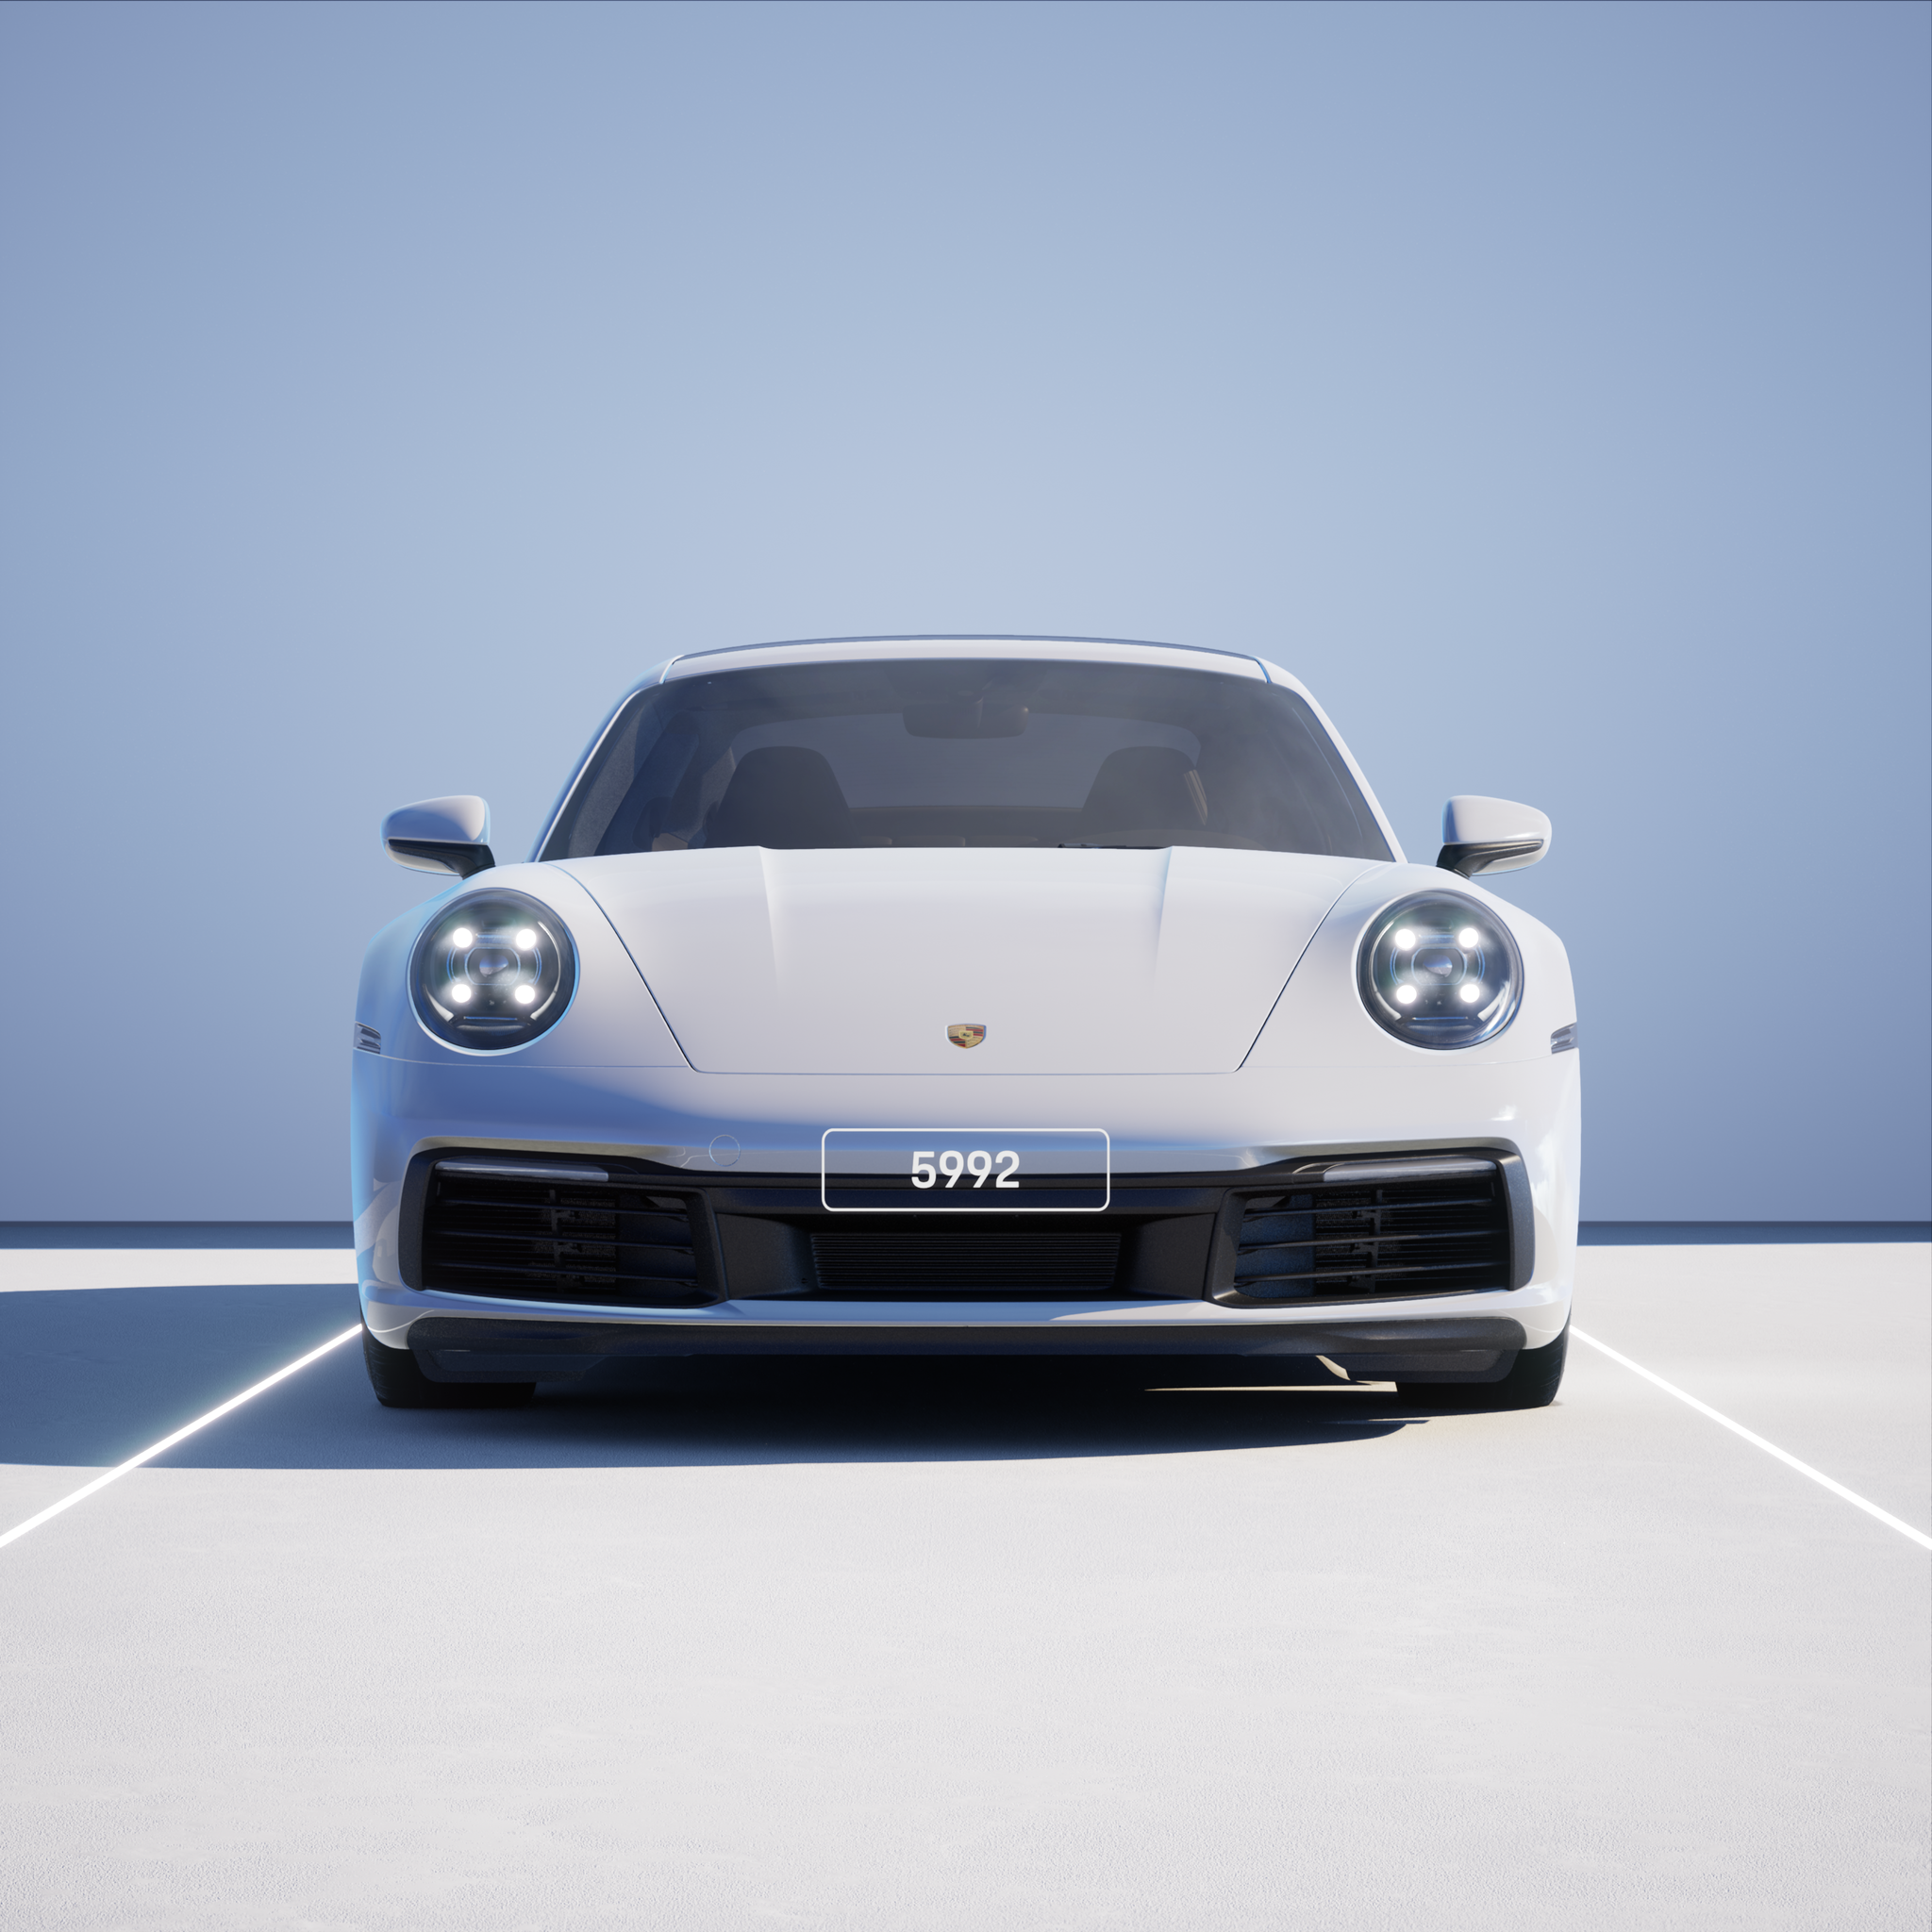 The PORSCHΞ 911 5992 image in phase